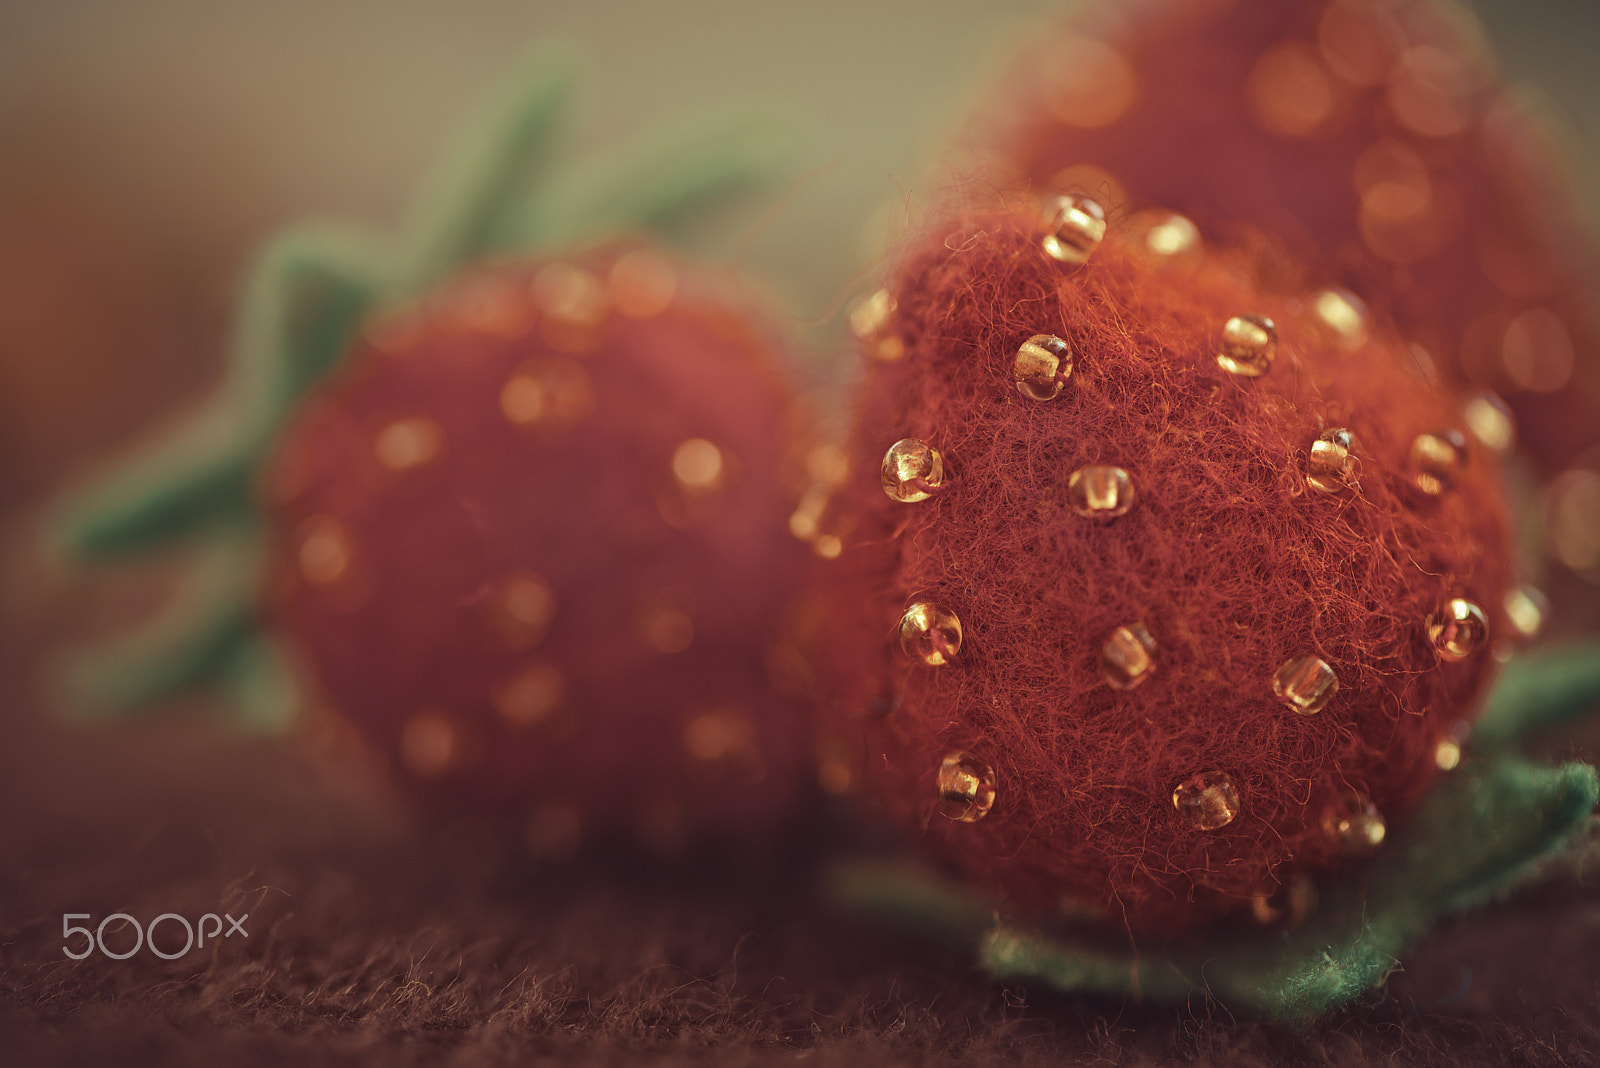 Nikon D600 + Nikon AF-S Micro-Nikkor 105mm F2.8G IF-ED VR sample photo. Strawberry fields forever photography